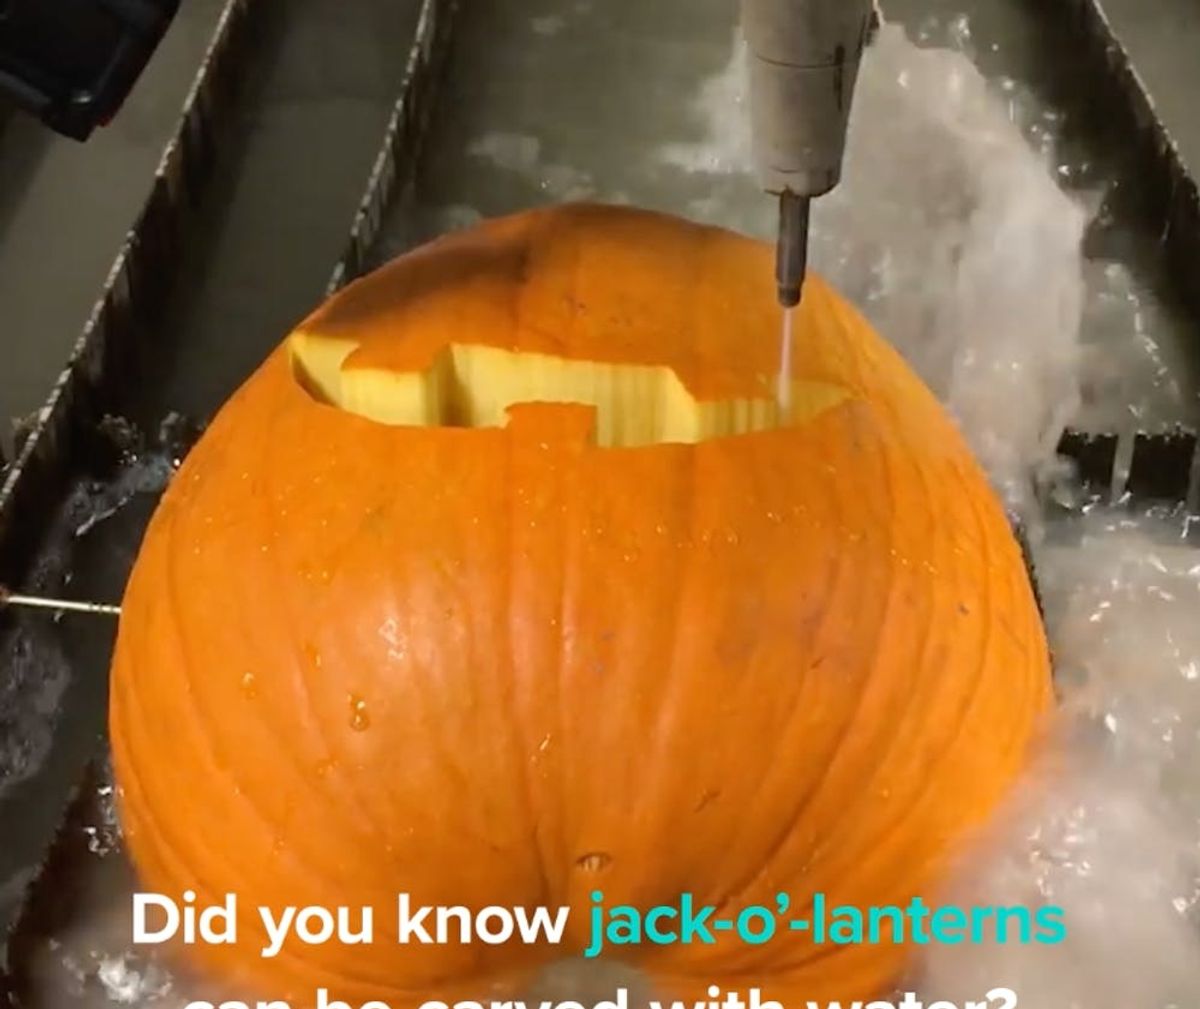 WTF! Pumpkins Can Be Carved With Water - Brit + Co